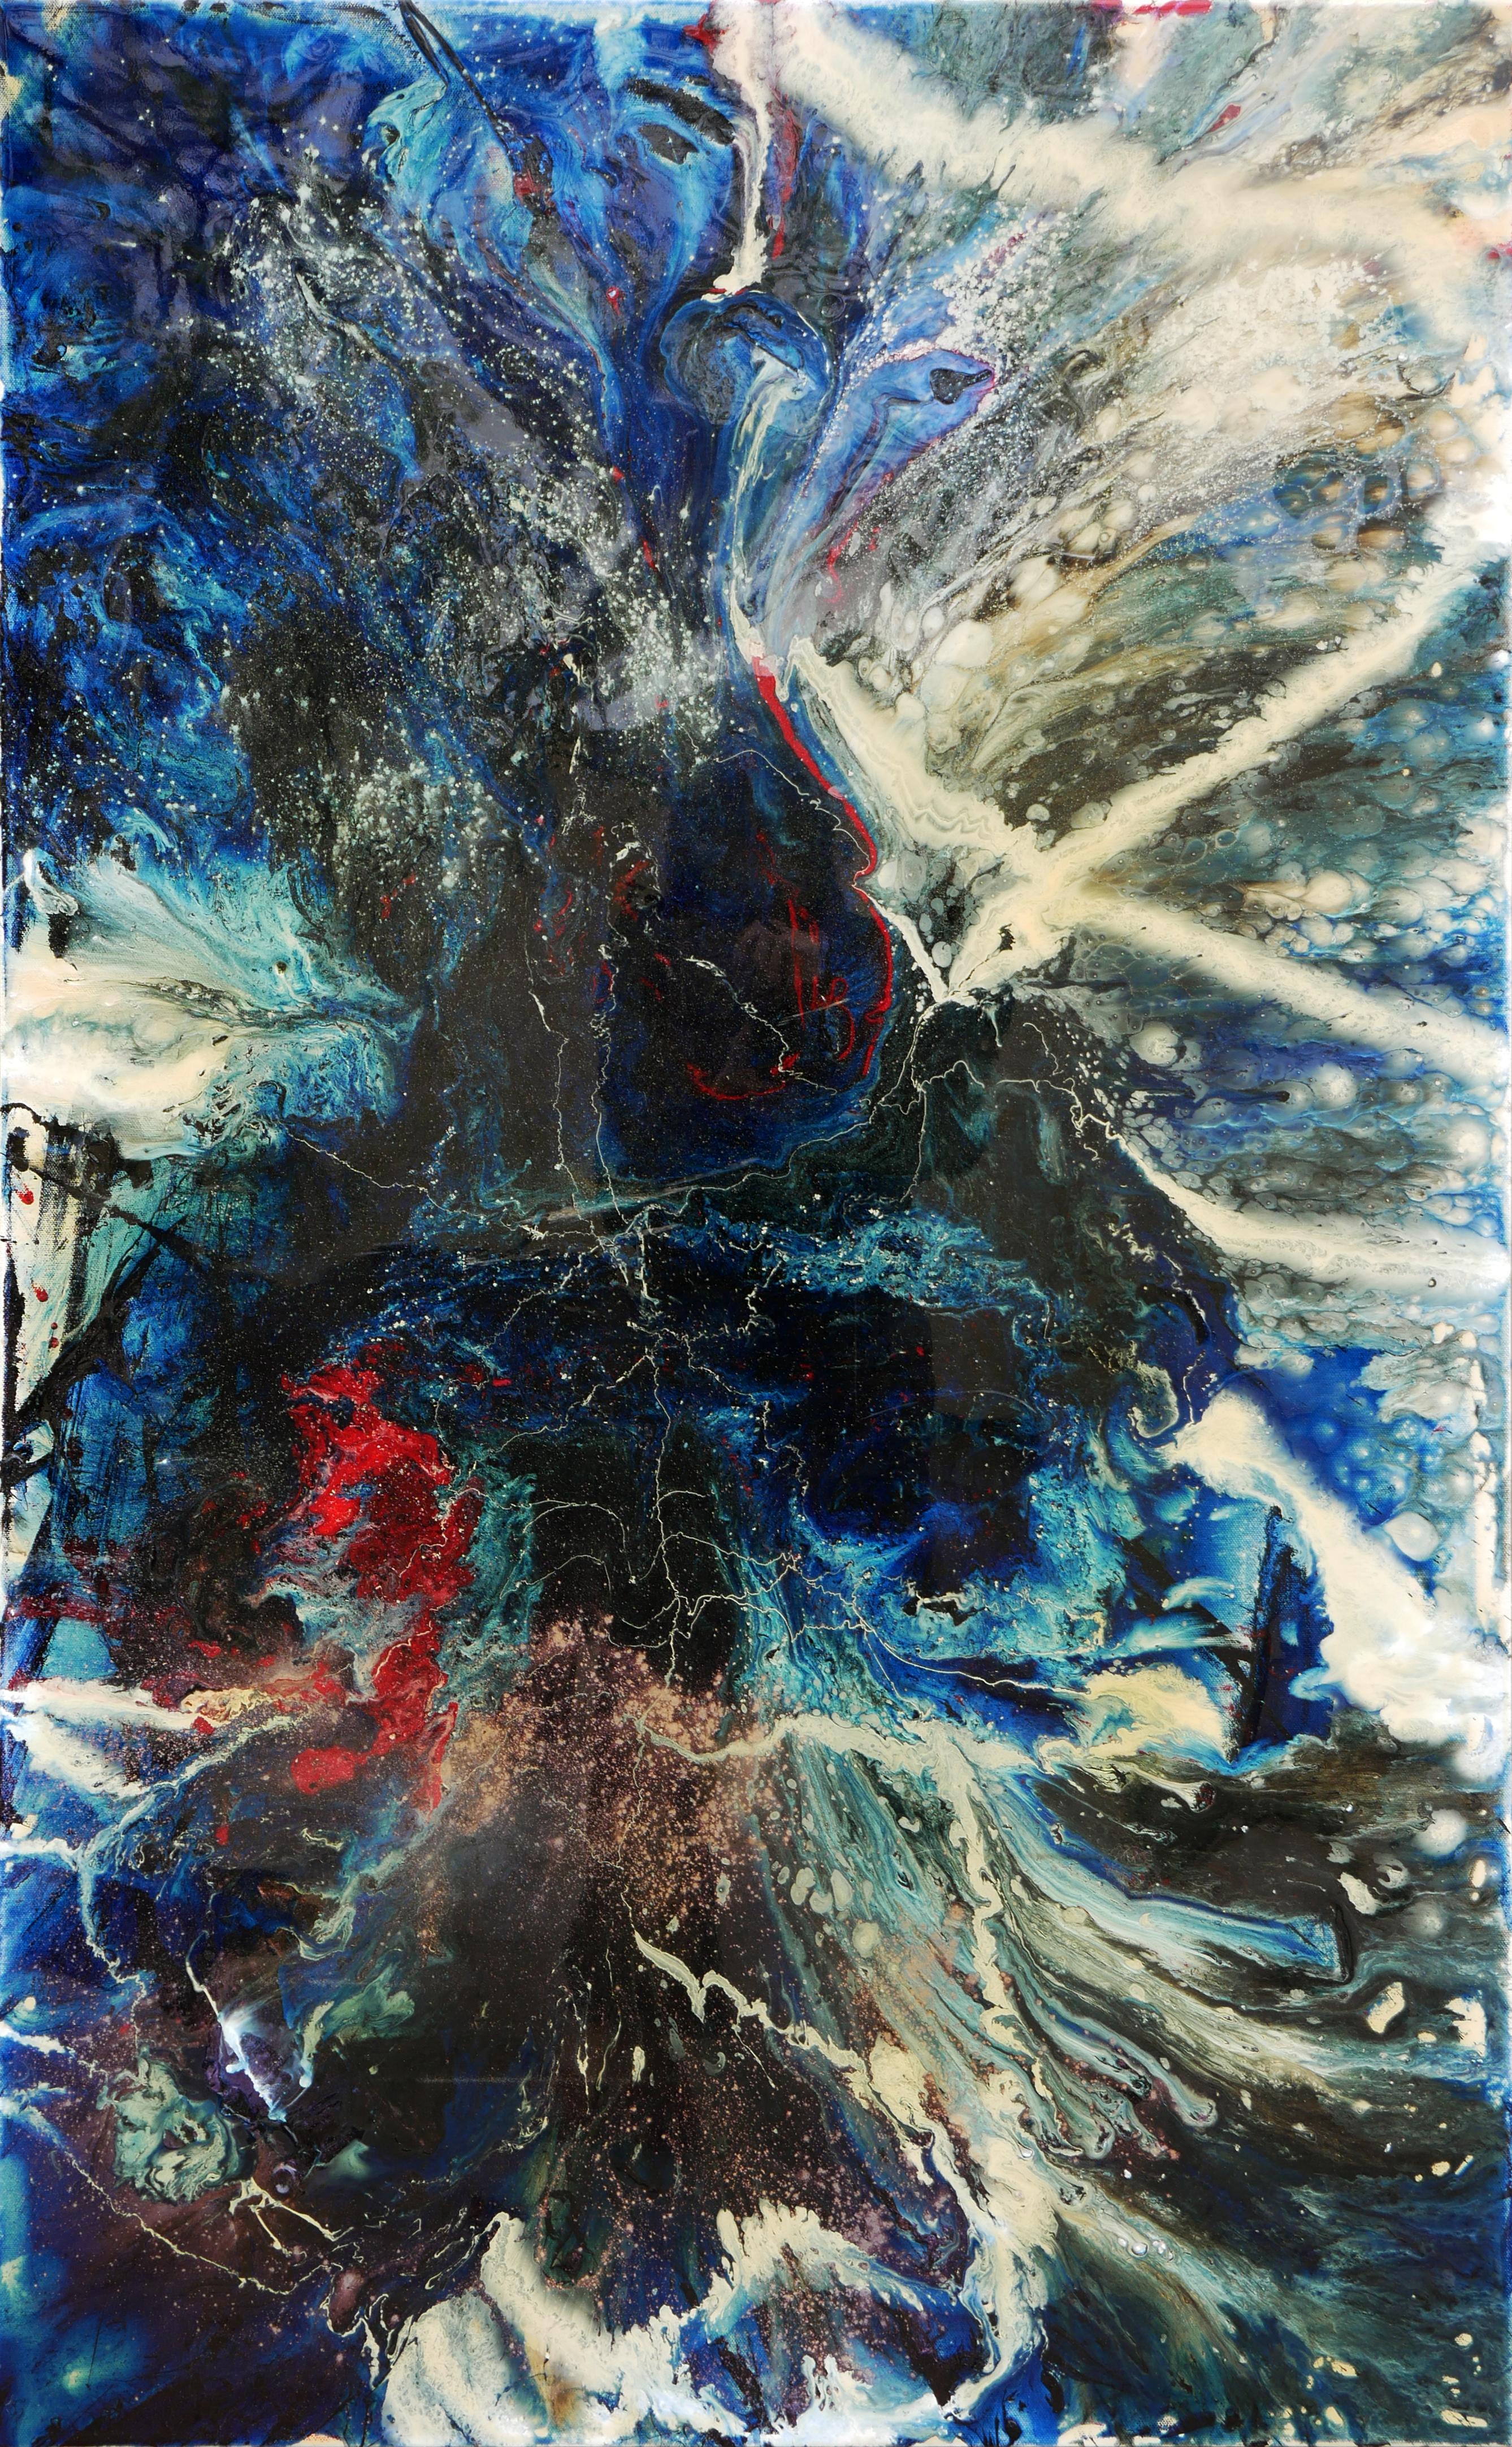 Joseph Abstract Painting - Blue, White, Black, and Red Abstract Marble Patterned Longitudinal Painting 